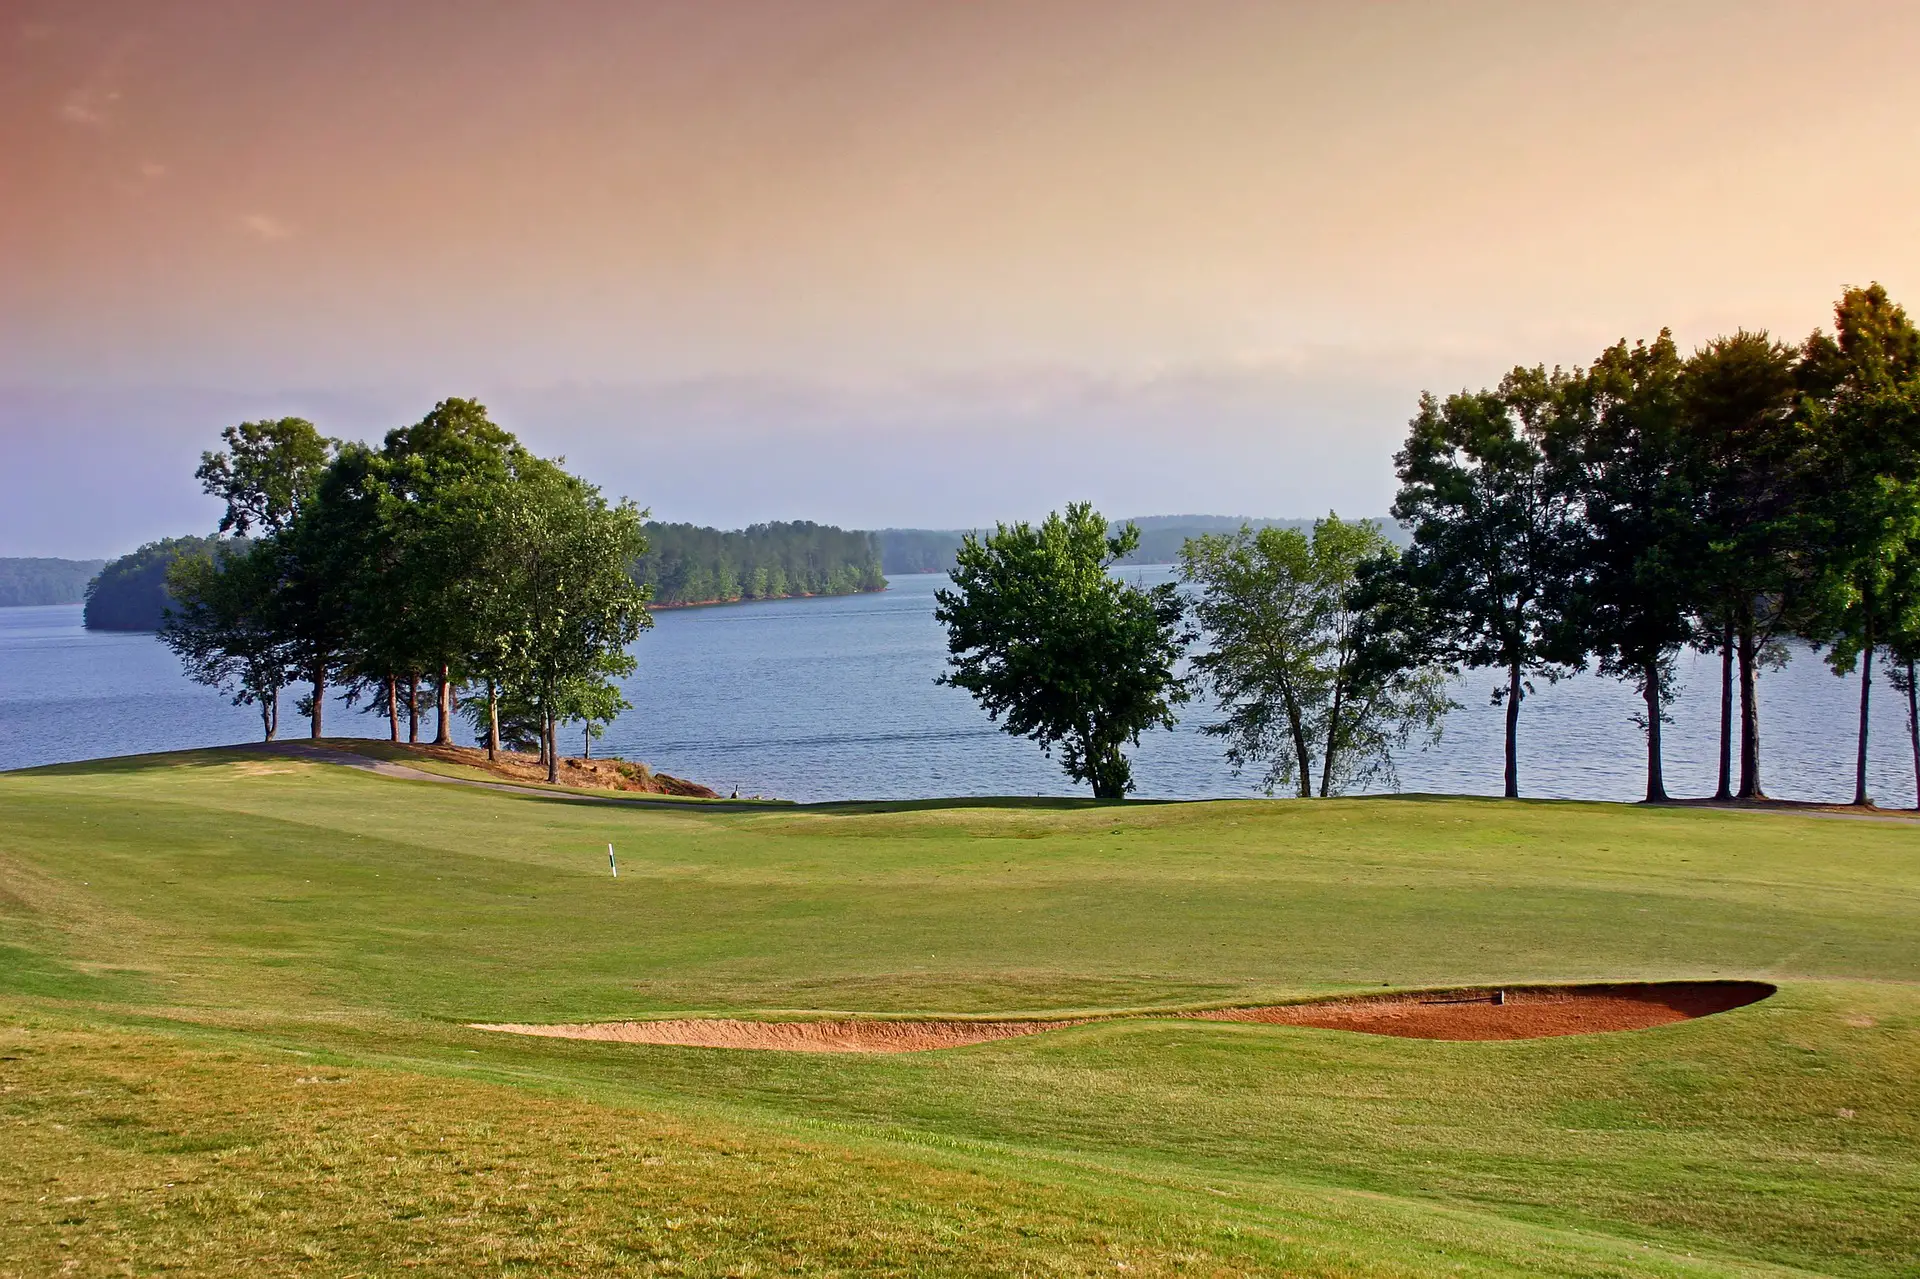 Golf course on the shore of a lake